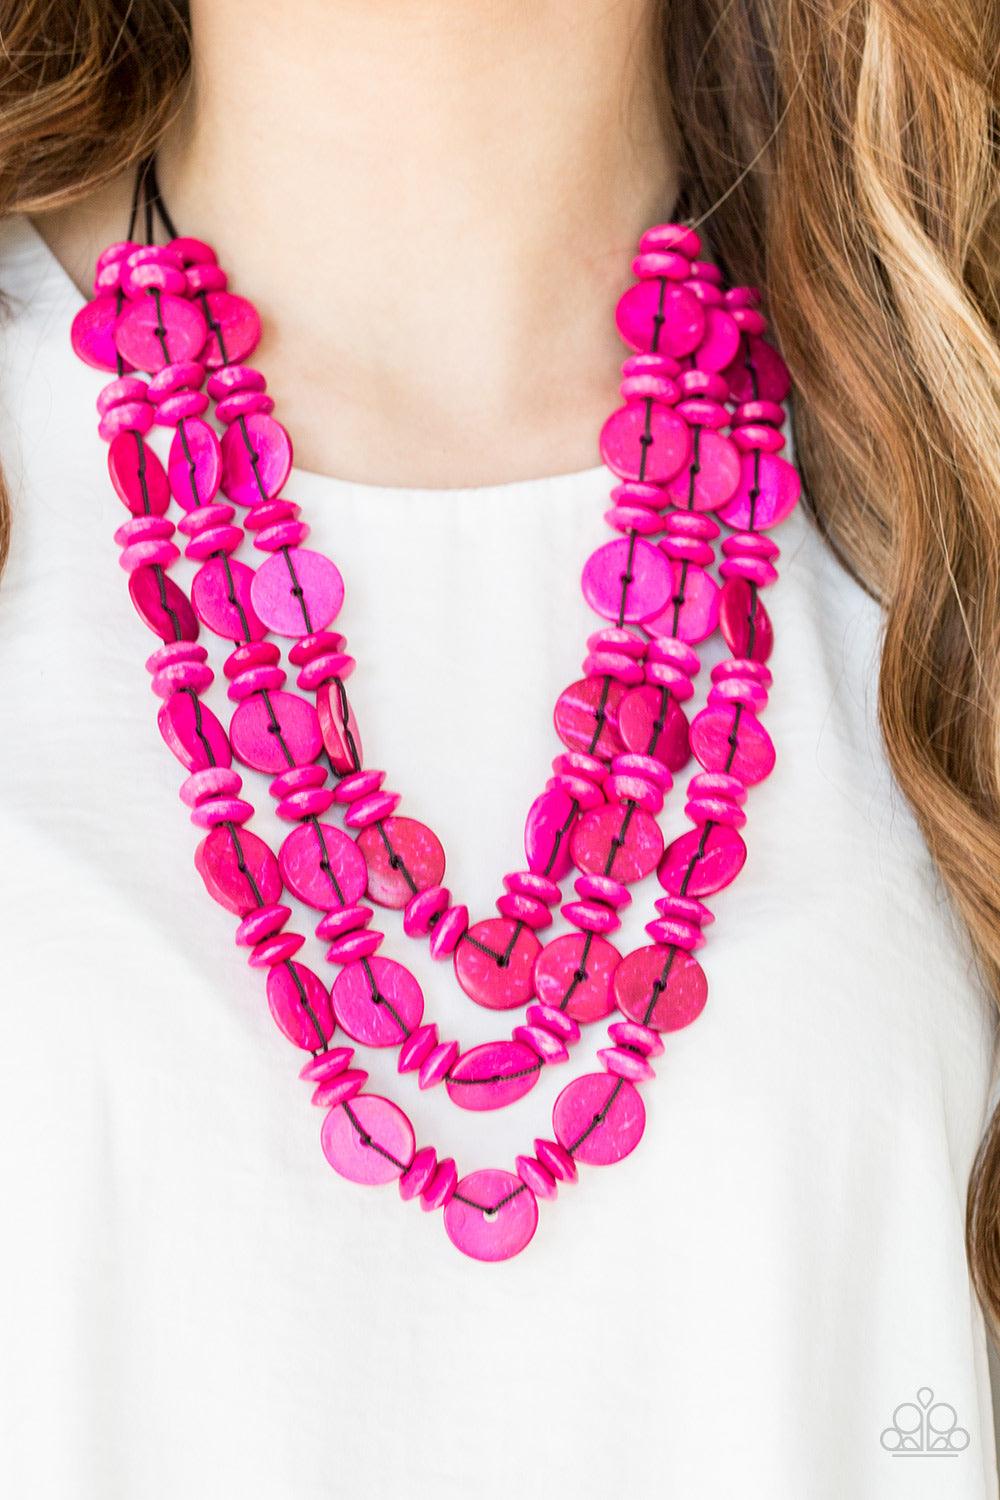 Barbados Bopper Pink Necklace - Jewelry by Bretta